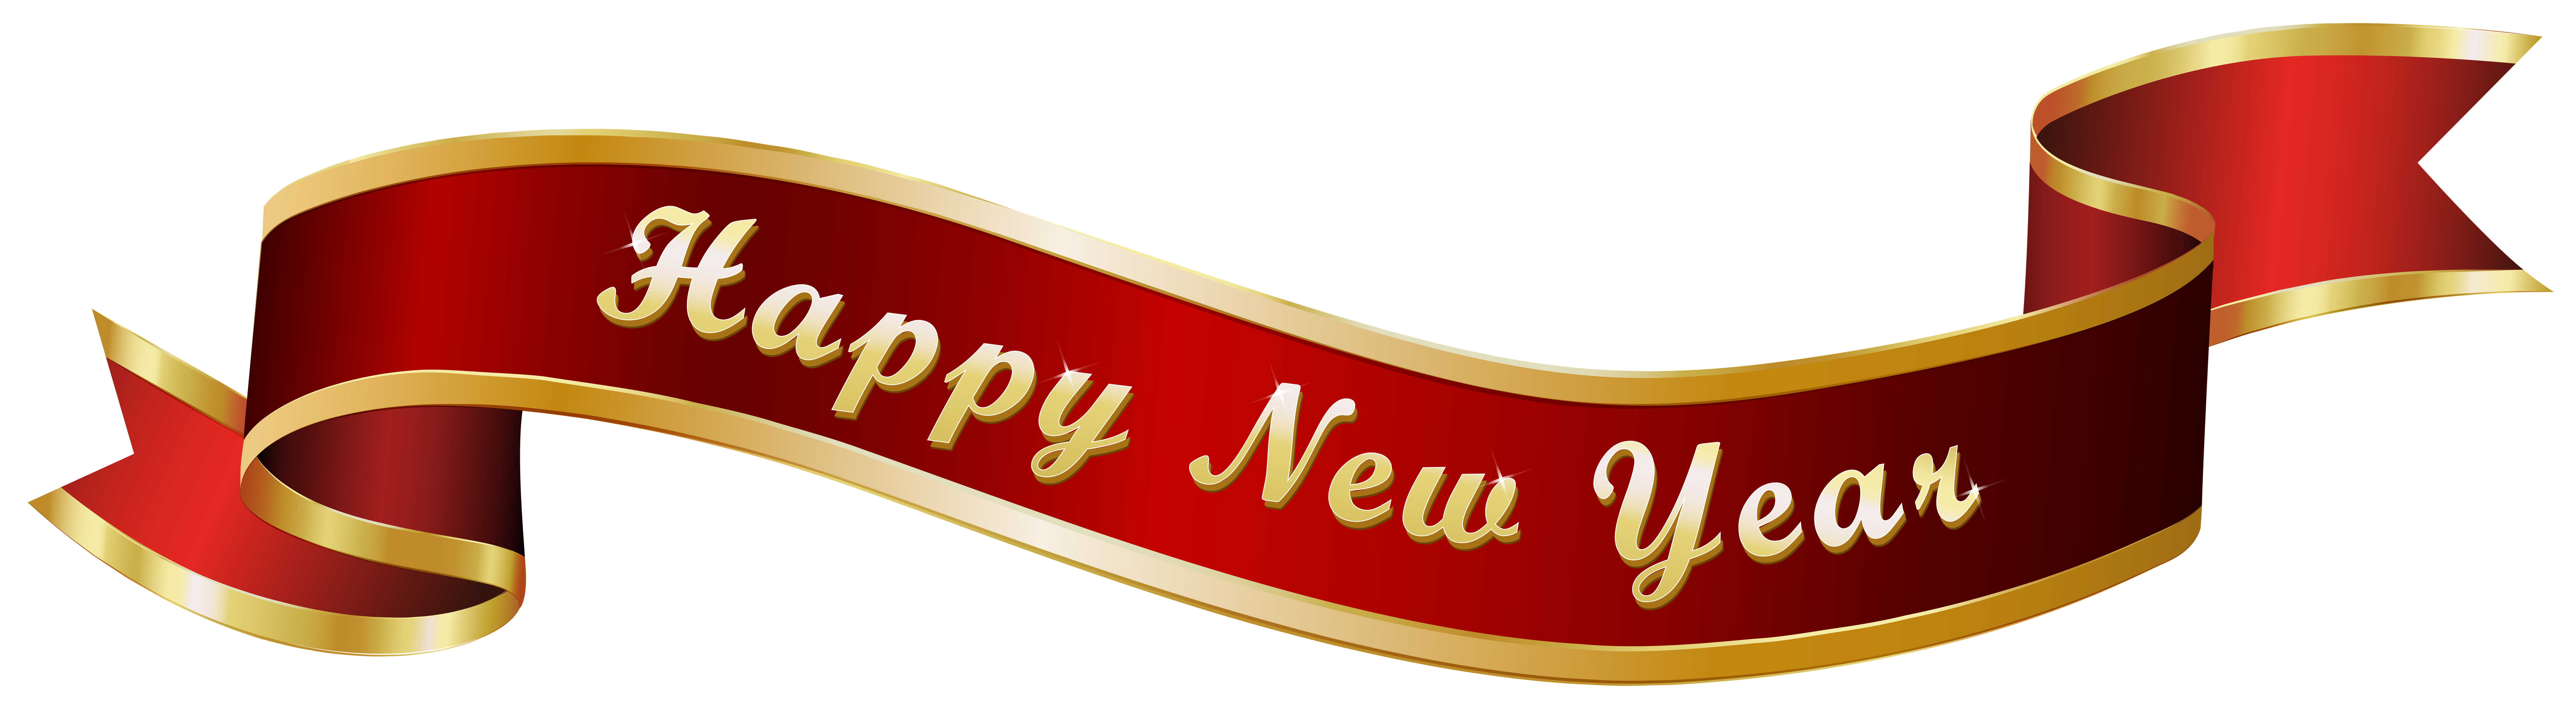 Happy New Year Red Banner Transparent PNG Clip Art Image​ | Gallery  Yopriceville - High-Quality Free Images and Transparent PNG Clipart